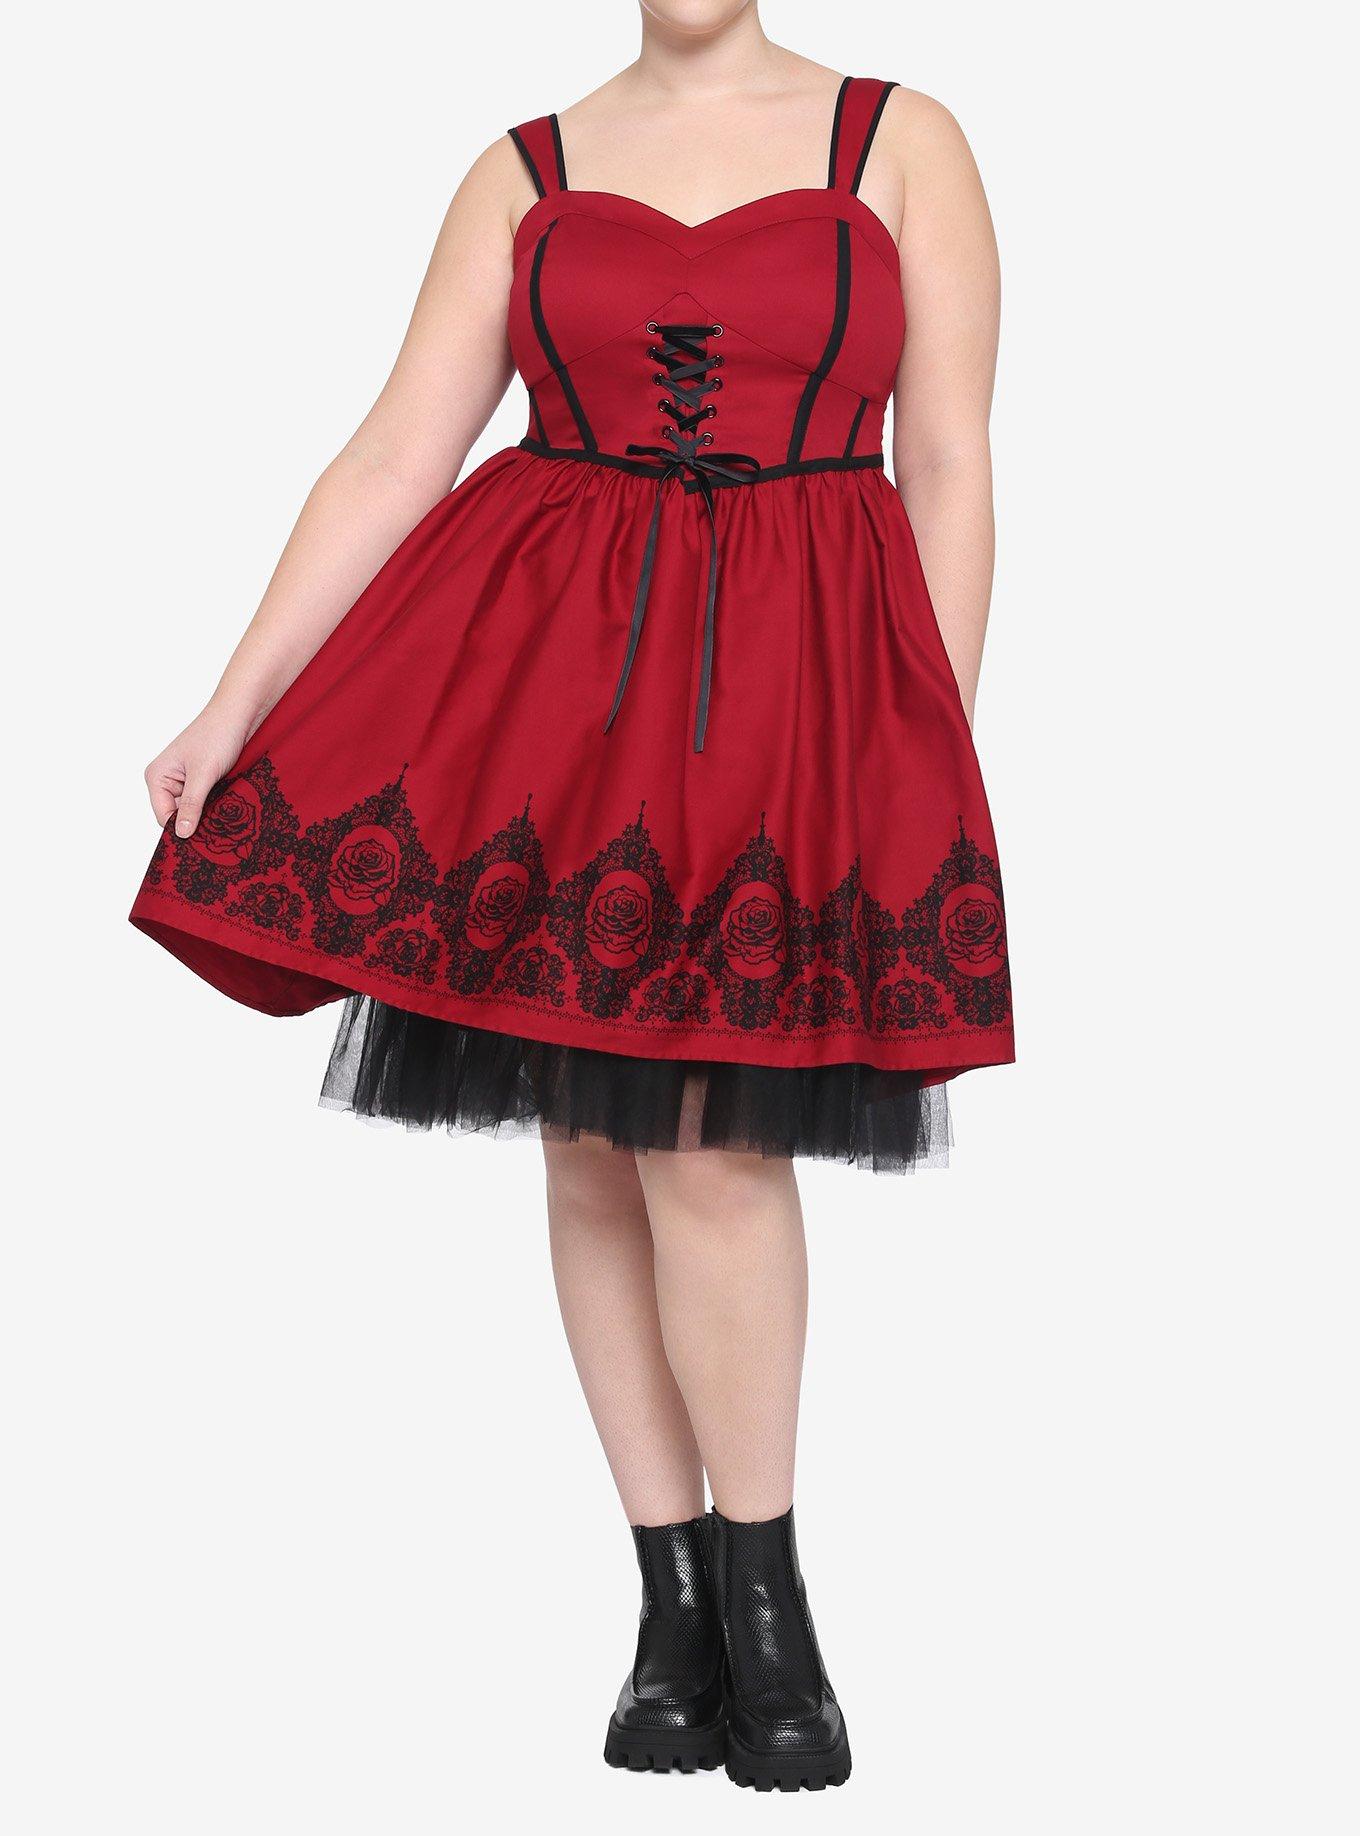 Red Roses Lace-Front Dress Plus Size, RED, alternate